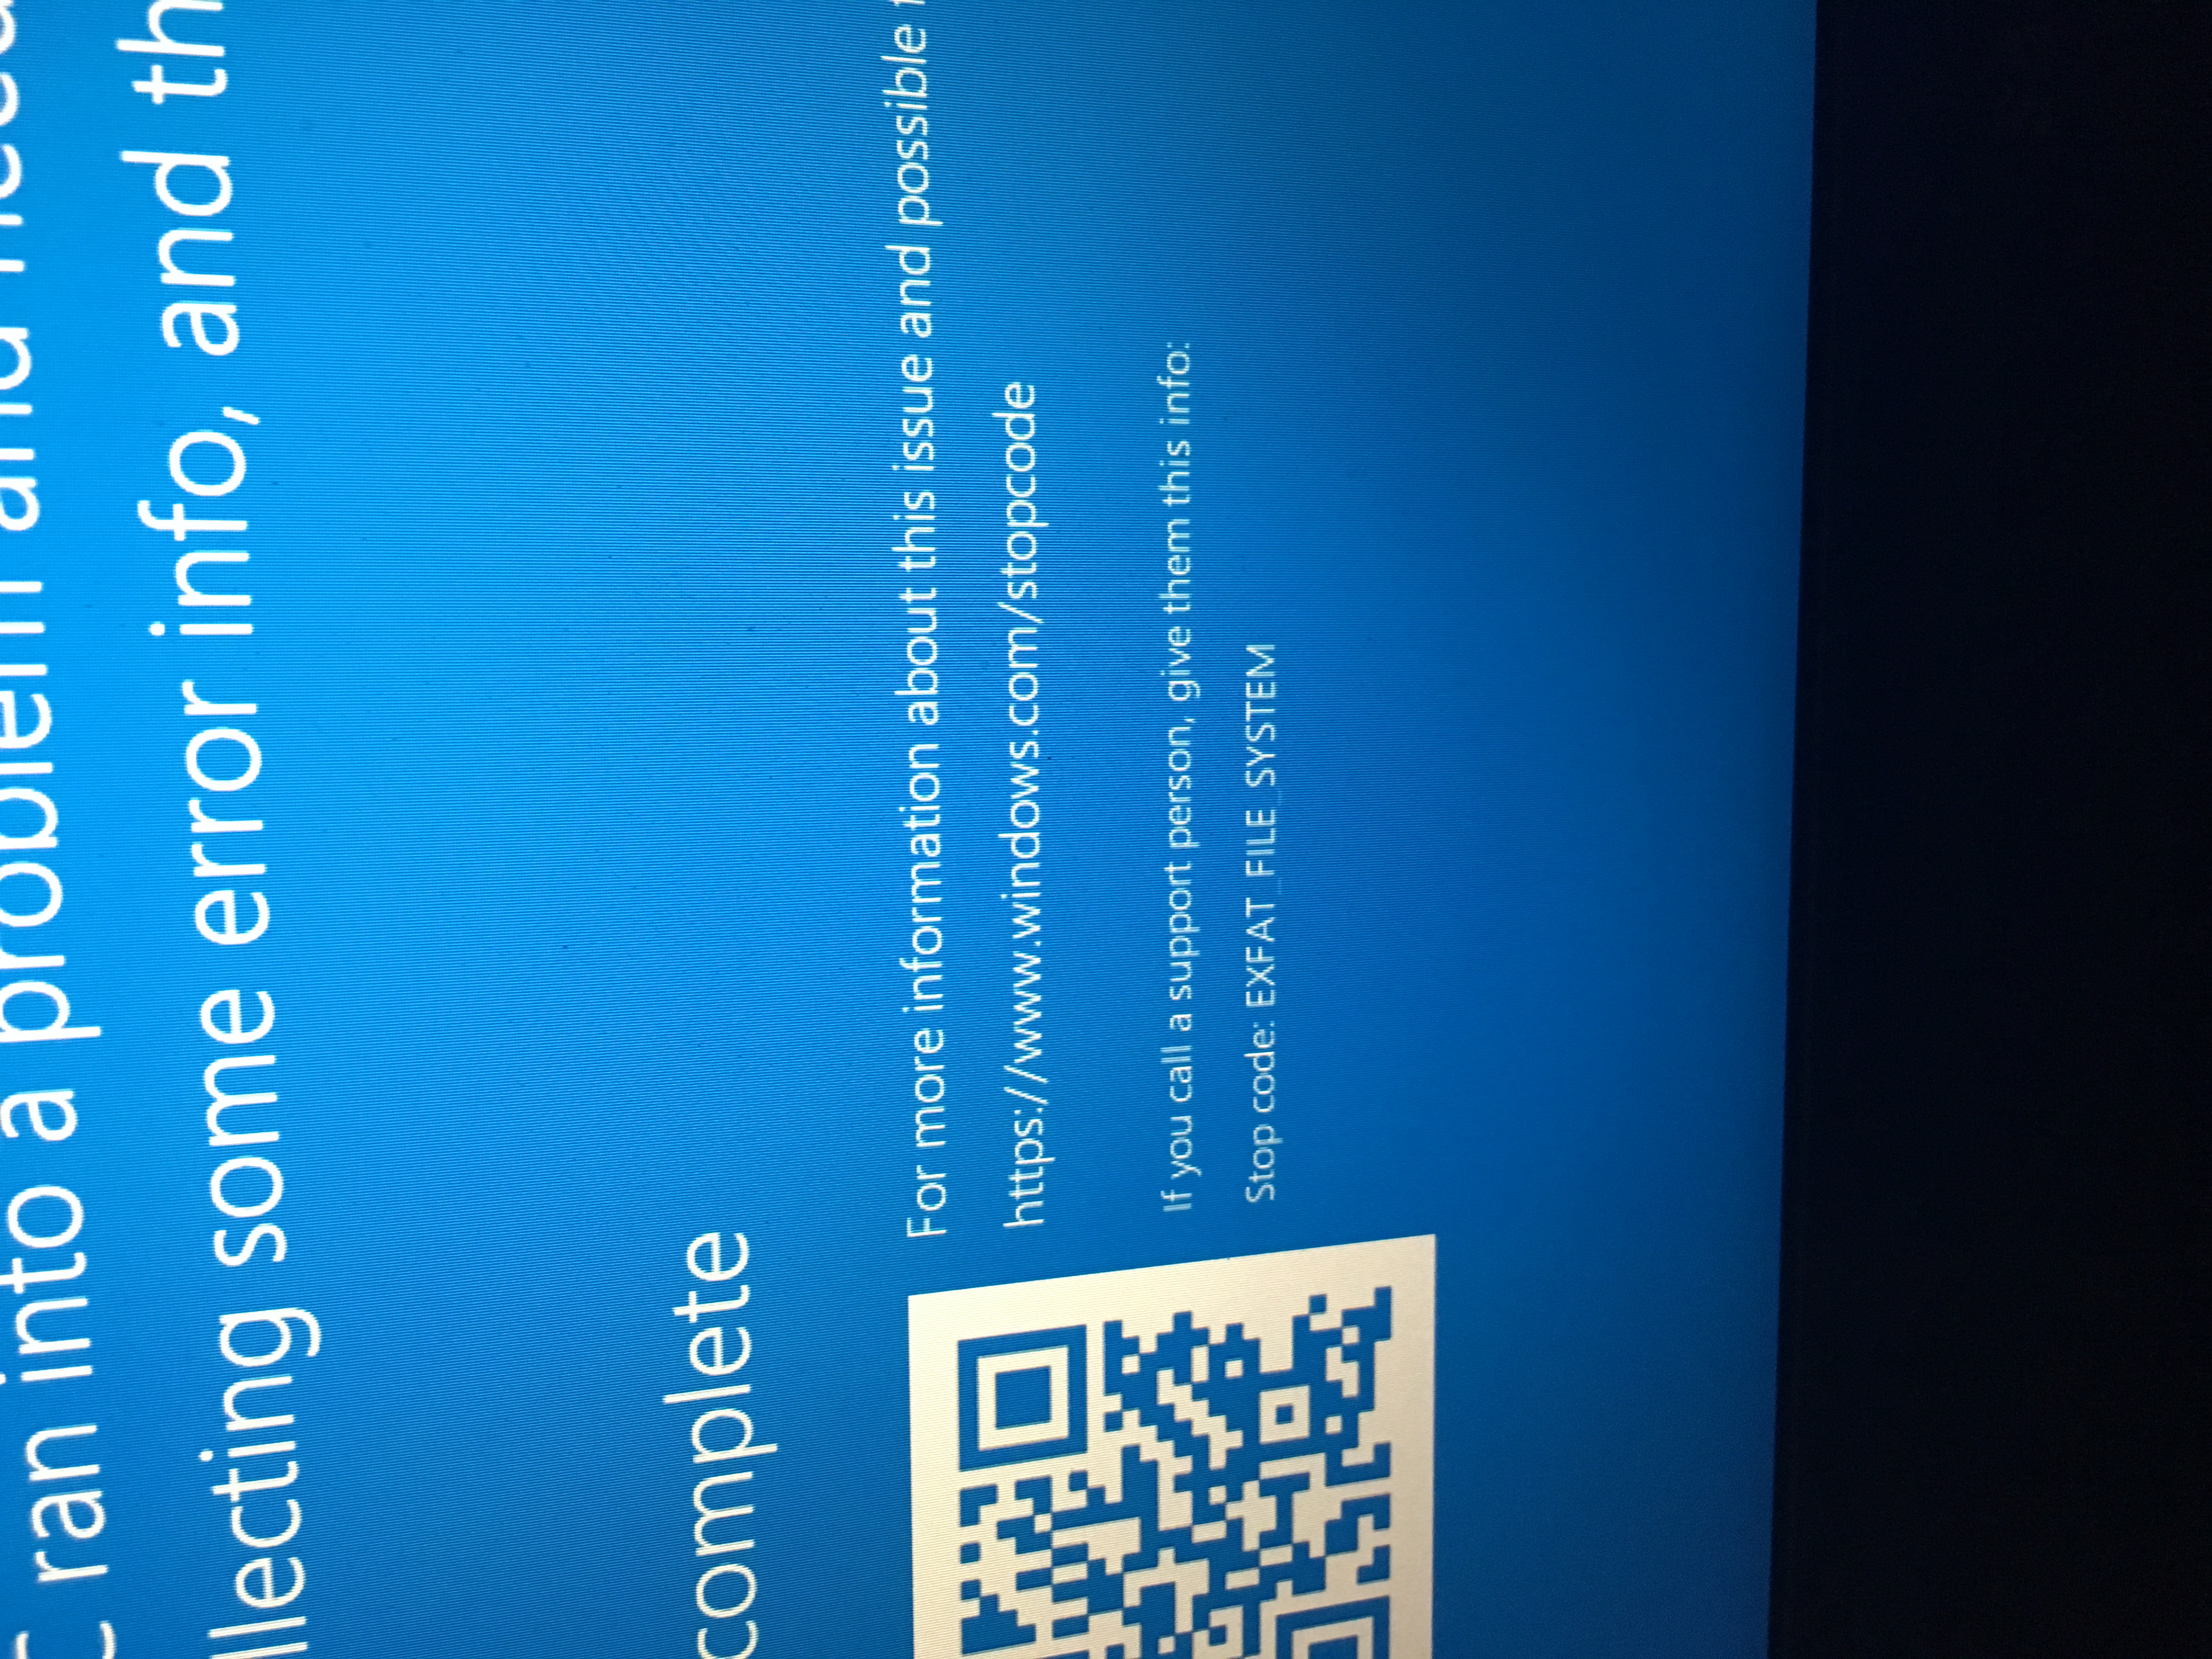 “Exfat file system” blue screen. While playing Forza 7 [​IMG]